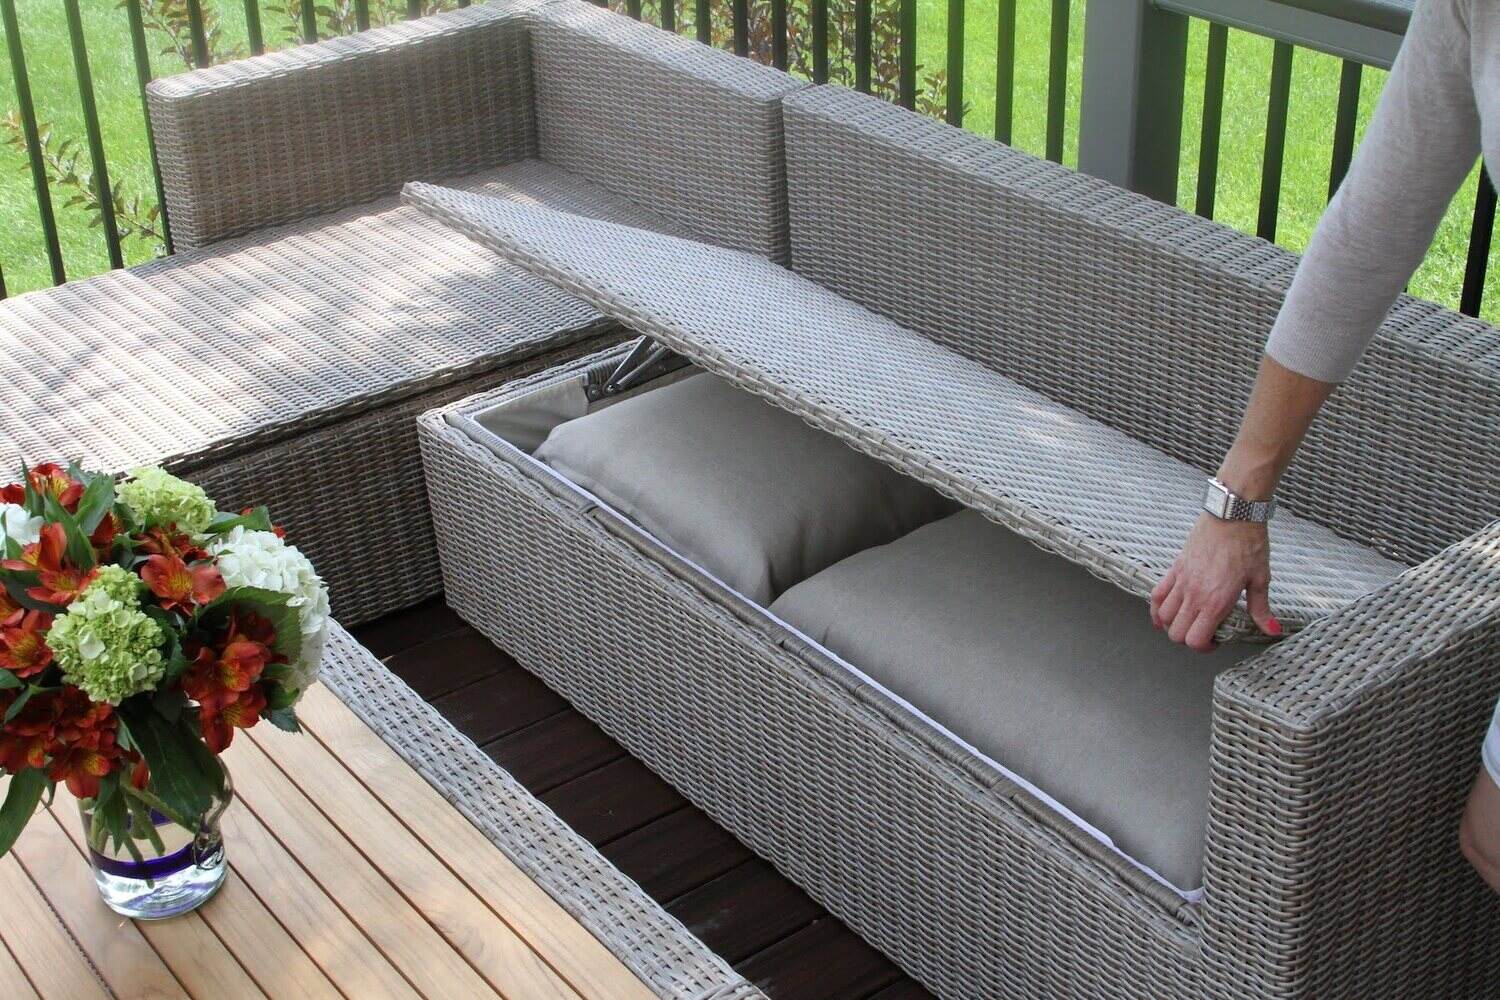 How To Store Cushions For Outdoor Furniture